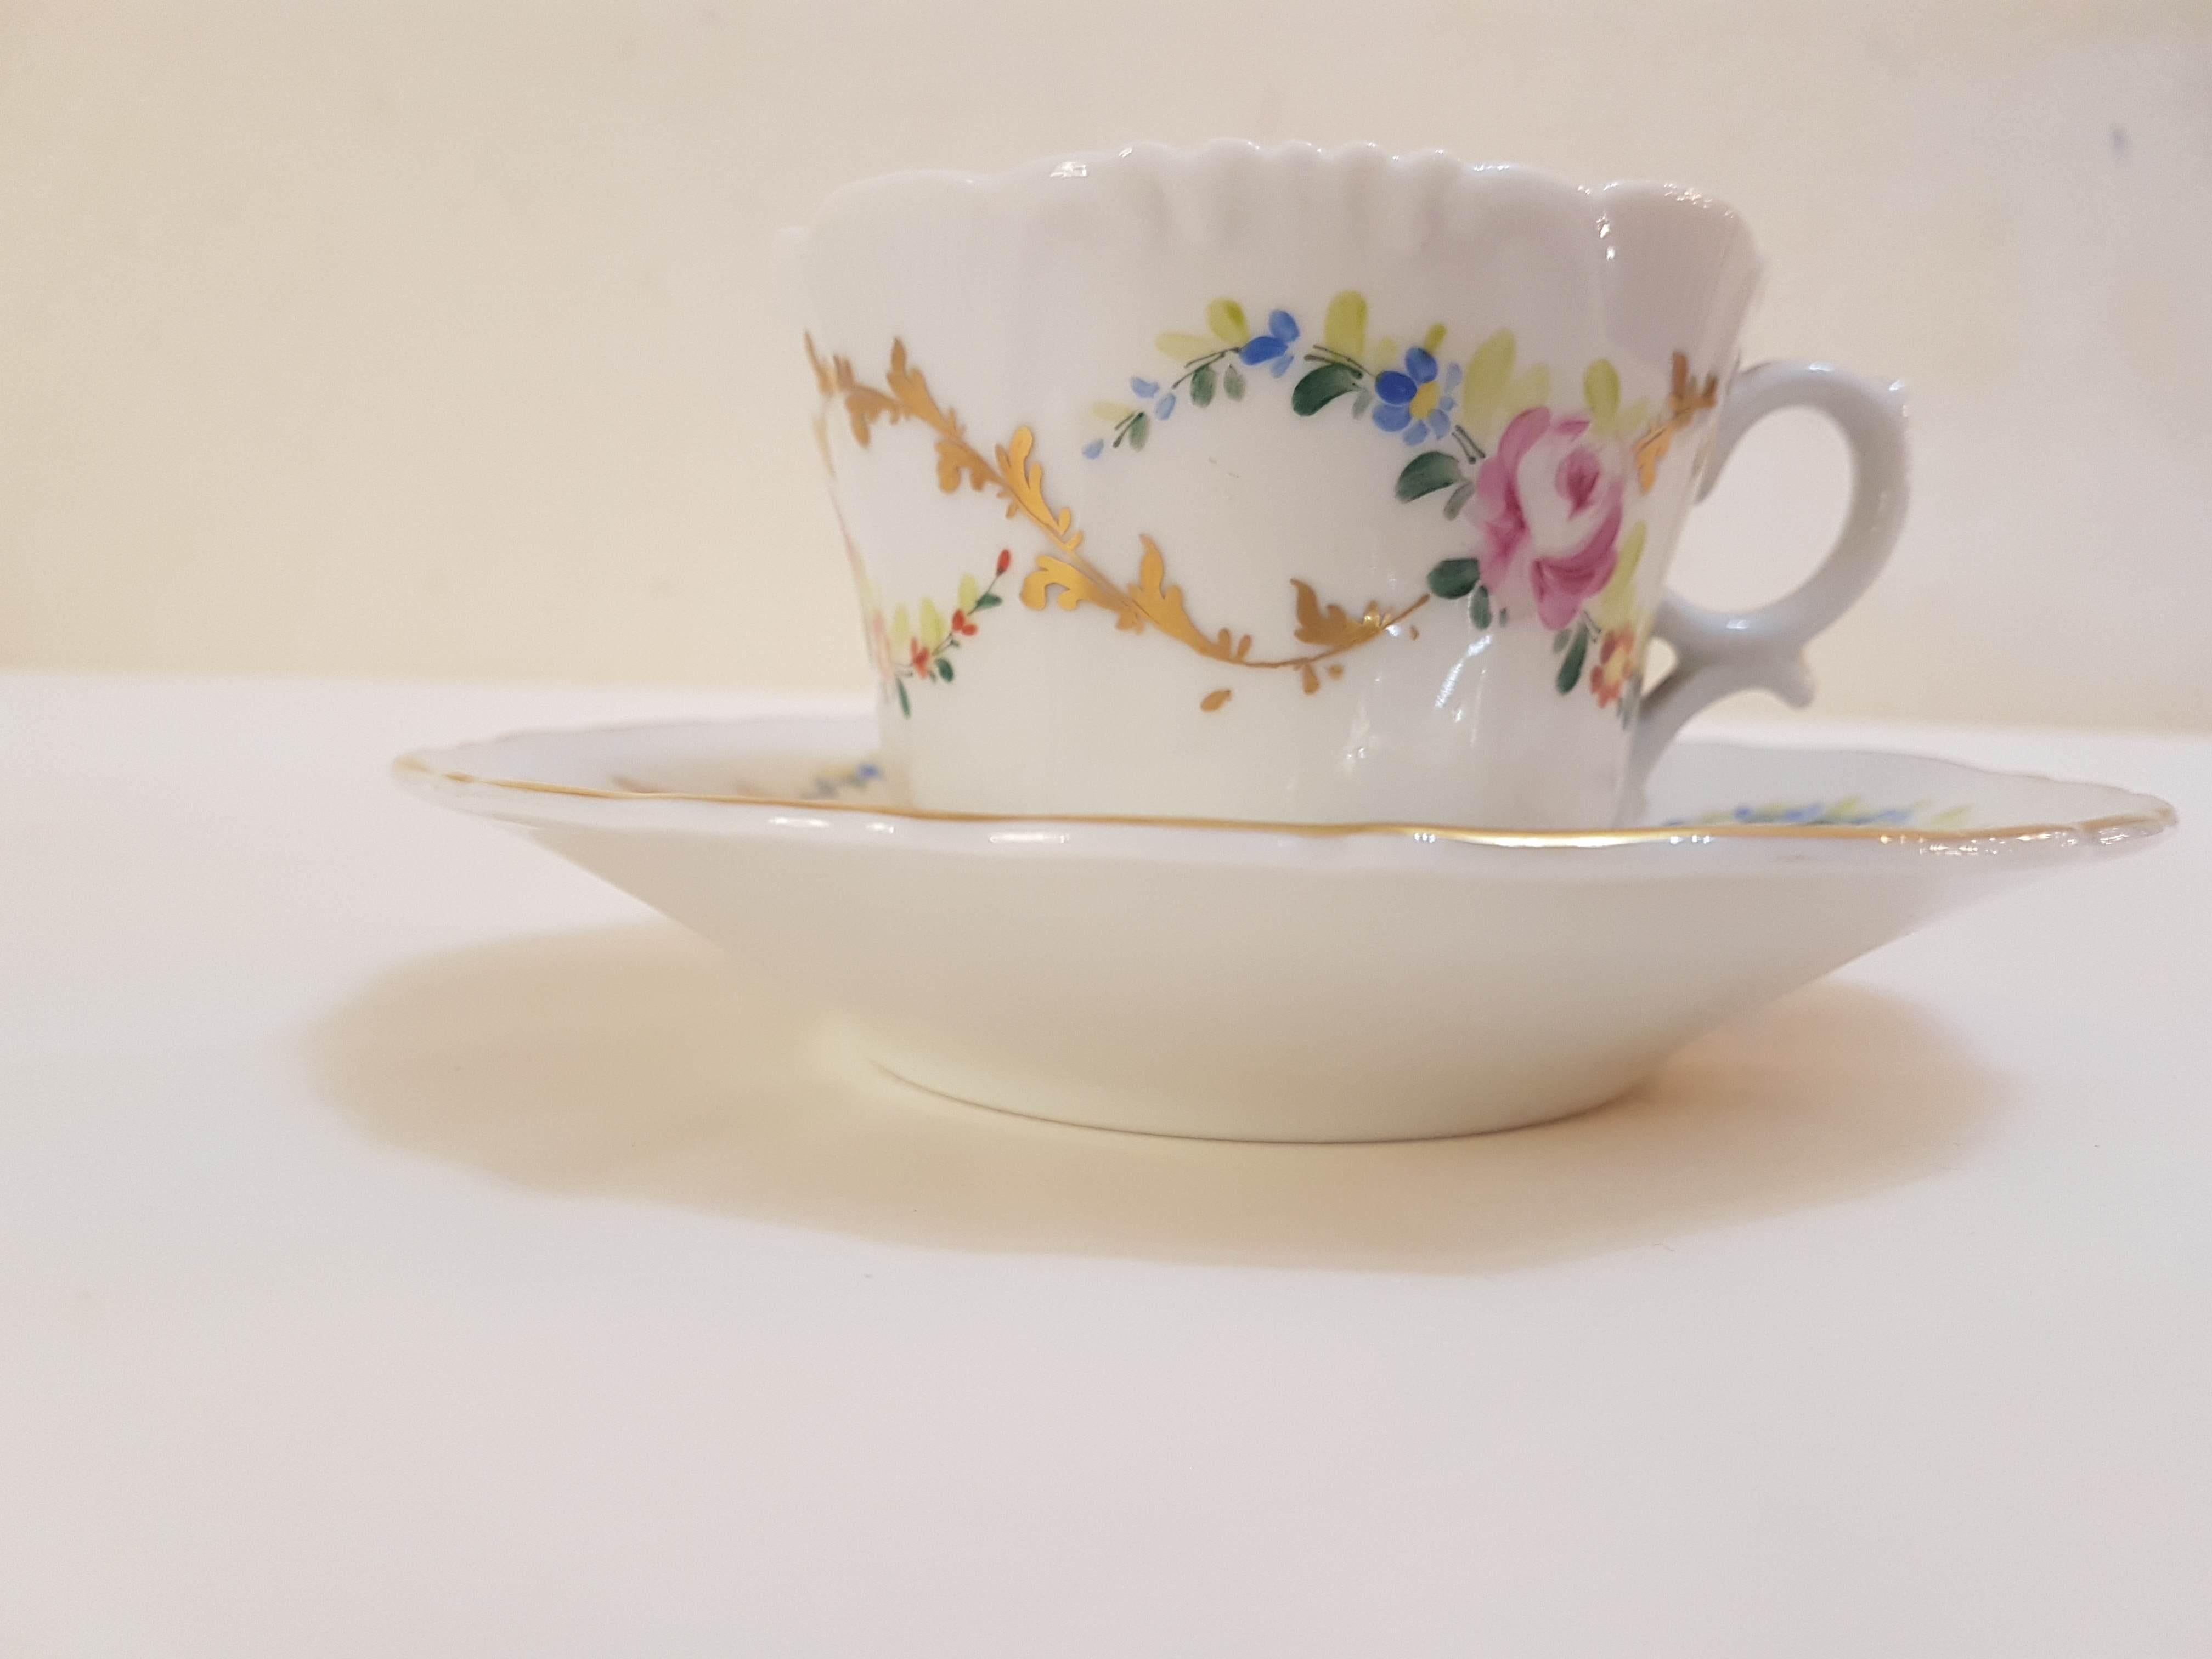 Magnificent collectible tea cup and saucer in portuguese porcelain Vista Alegre , hand-painted, decorated with floral motifs.

Vista Alegre was founded in 1824 by Josè Ferreira Pinto Basto obtaining the royal diploma from His Majesty the King Don